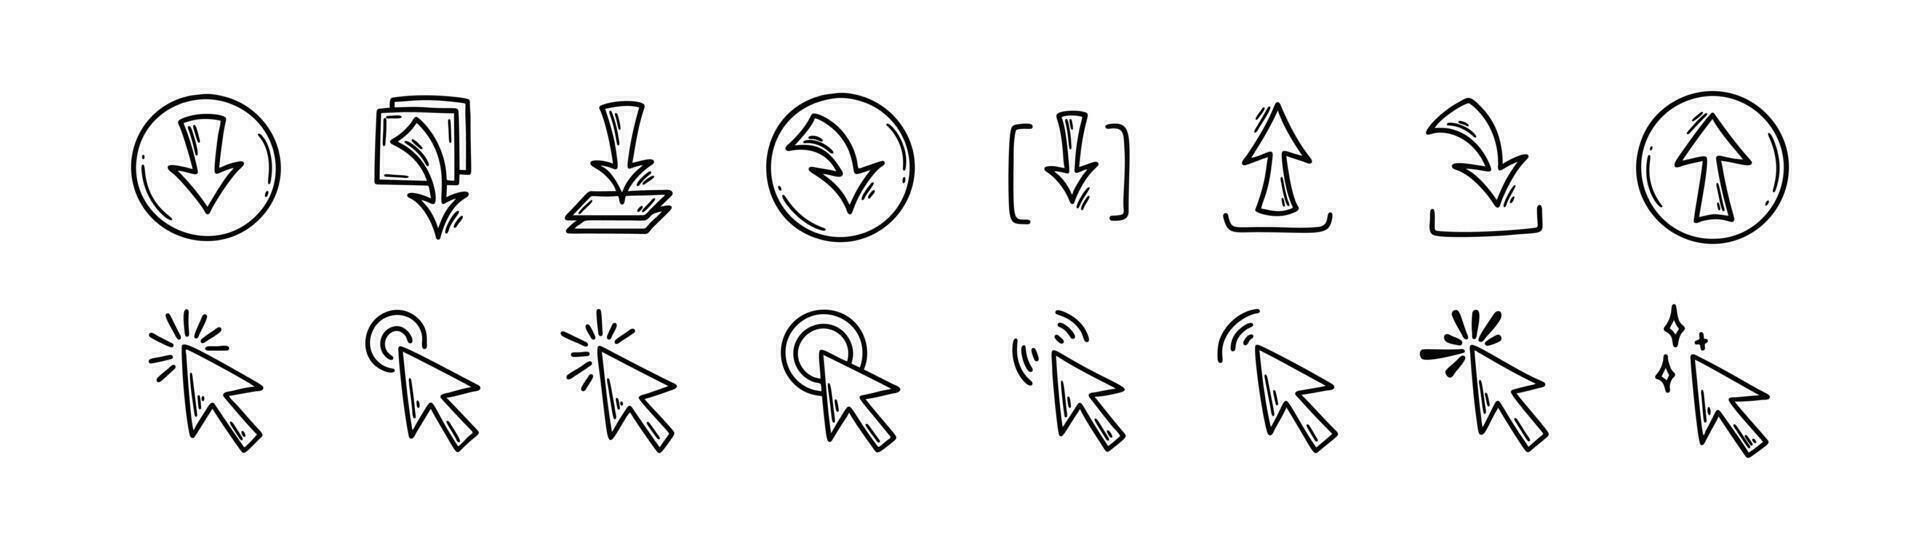 Download and upload file doodle icons set. Hand drawn sketch interface buttons. Data server technology. Digital storage arrow pictogram. vector